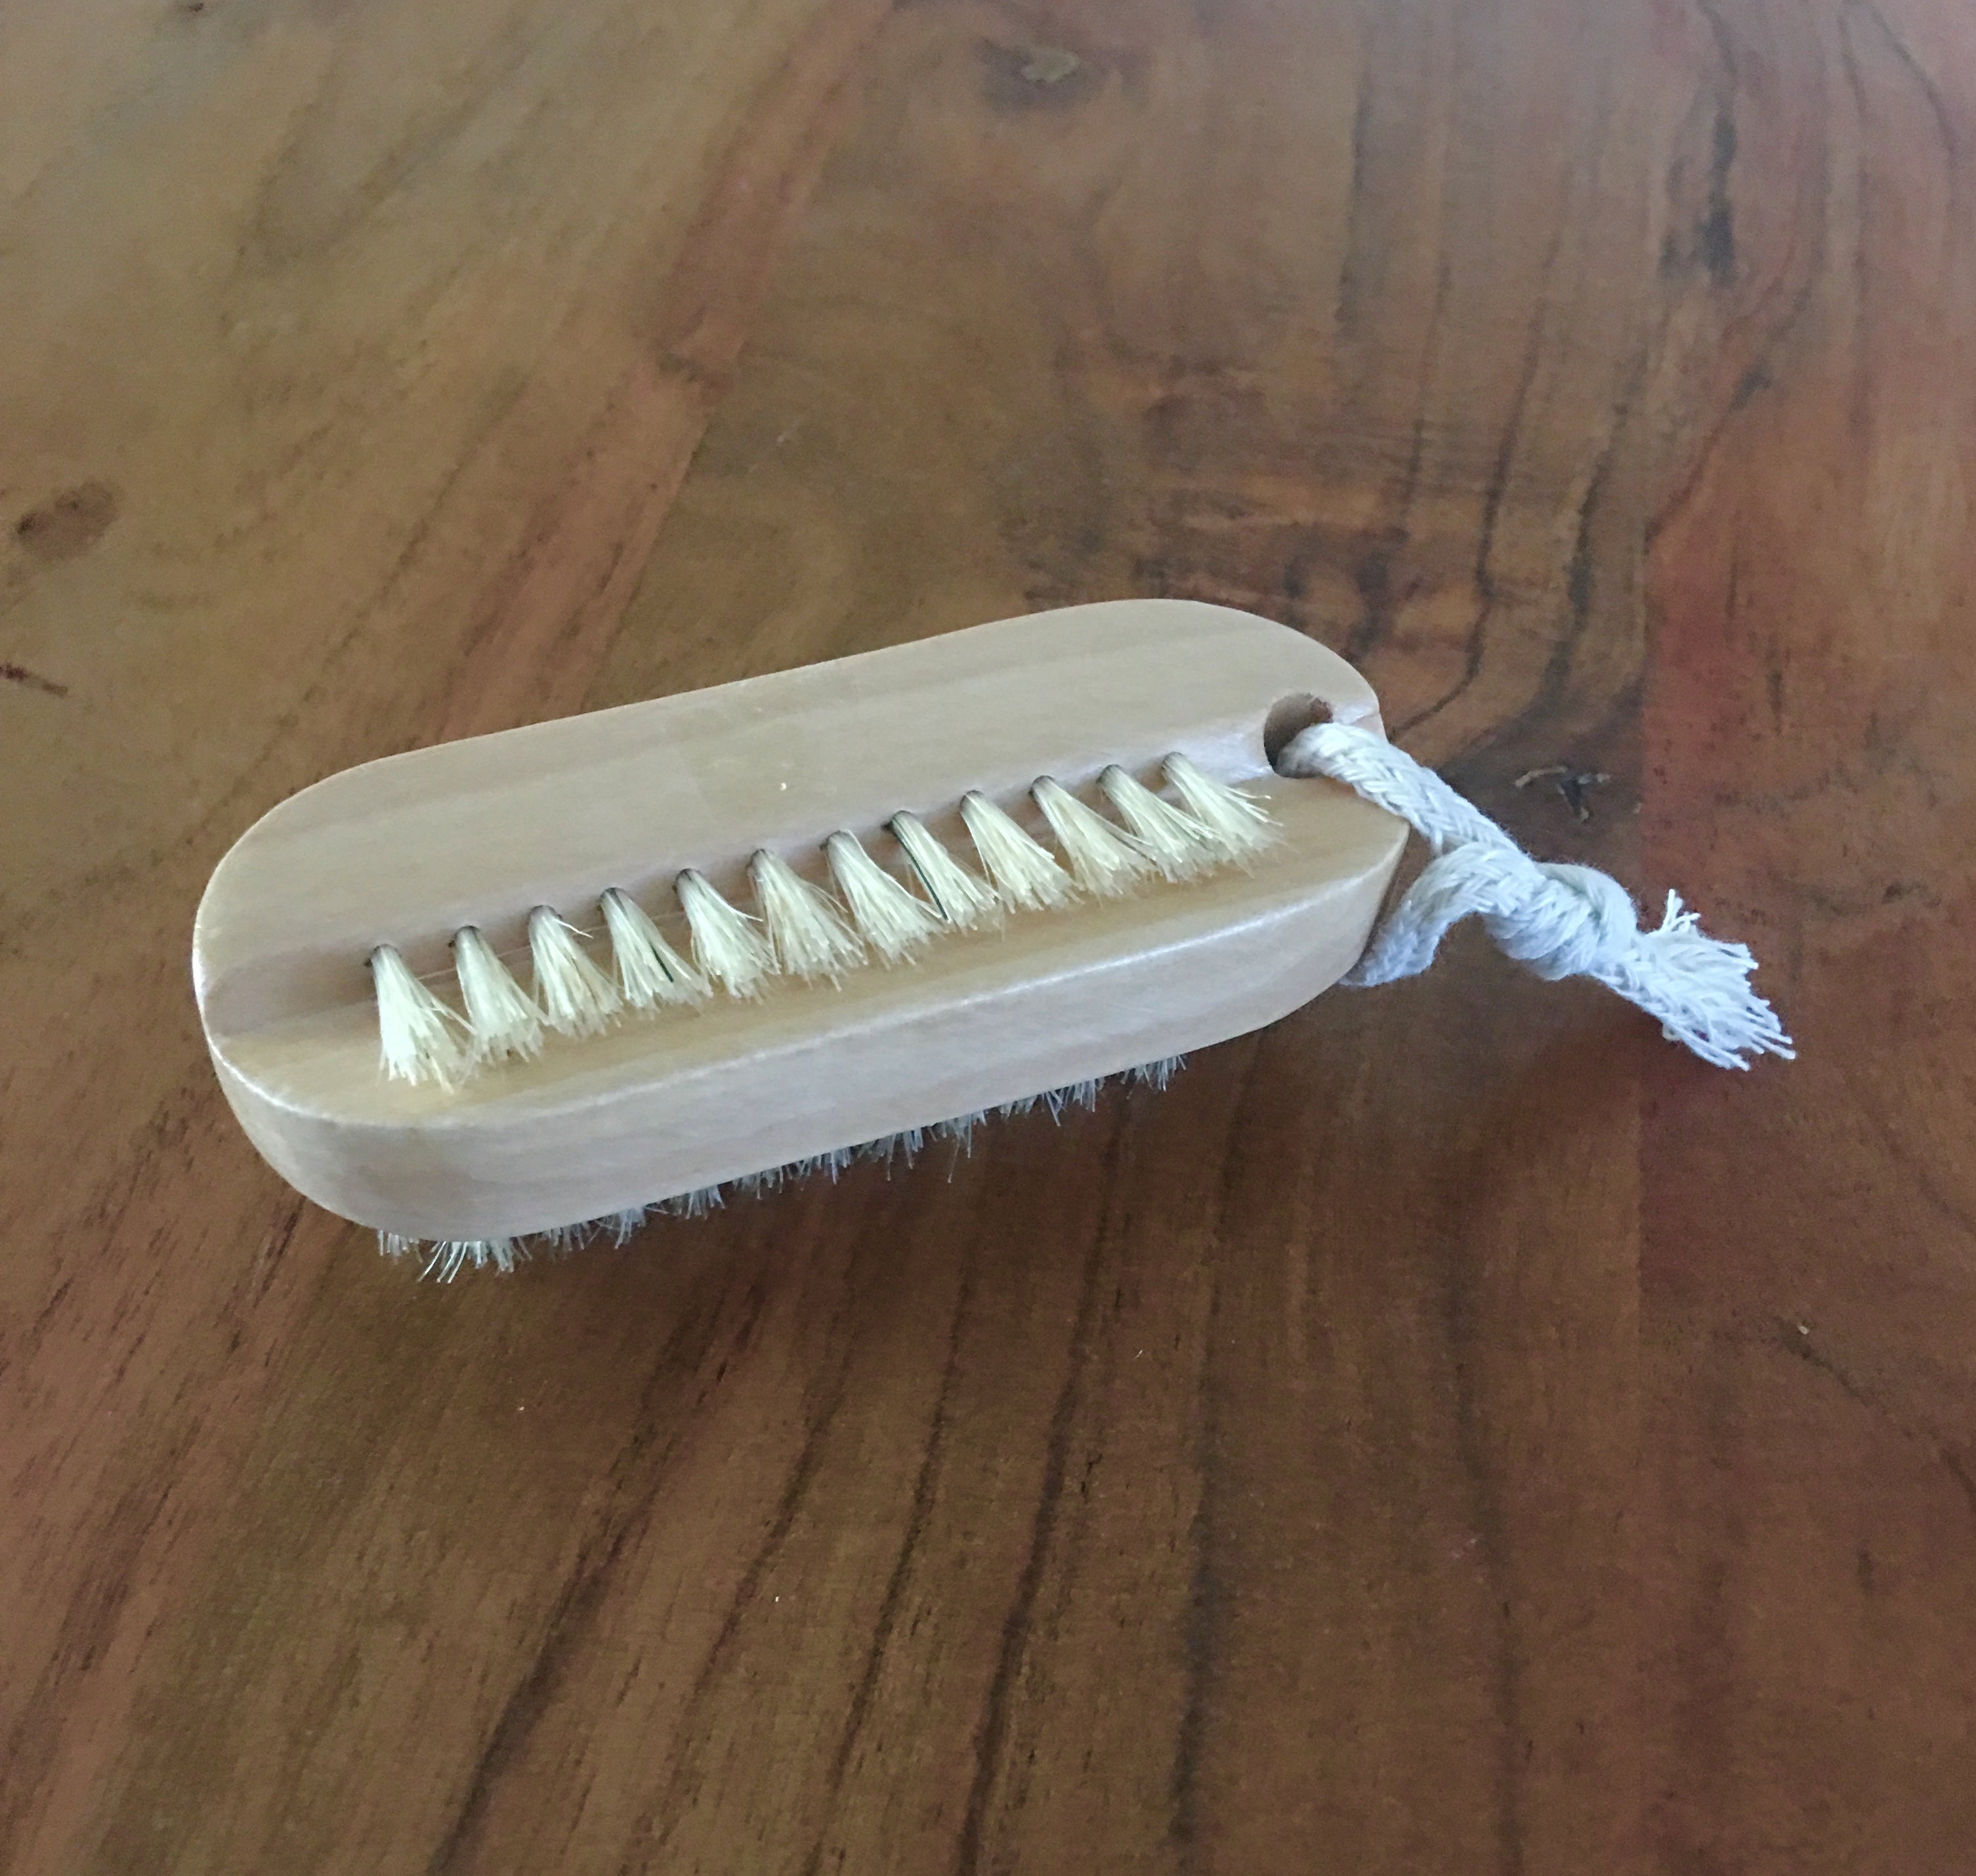 Dual Sided Wooden Nail Brush